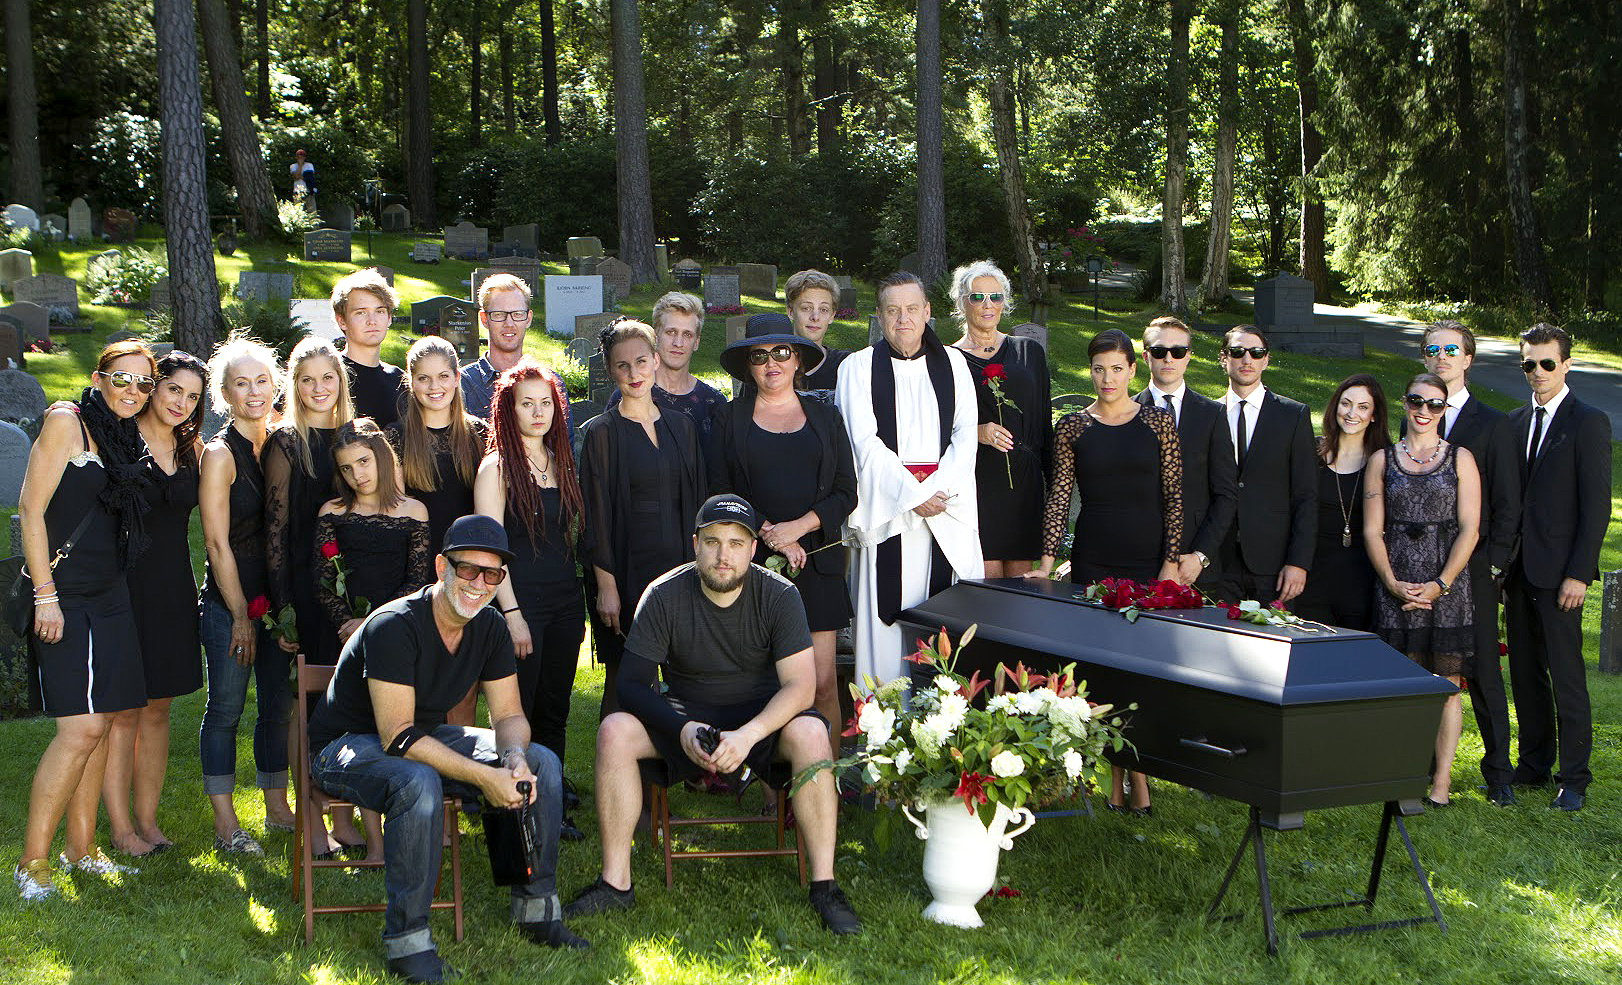 My whole cast and crew on set shooting RedCard, August 2015. (Me in my role as Executive Producer / Producer).